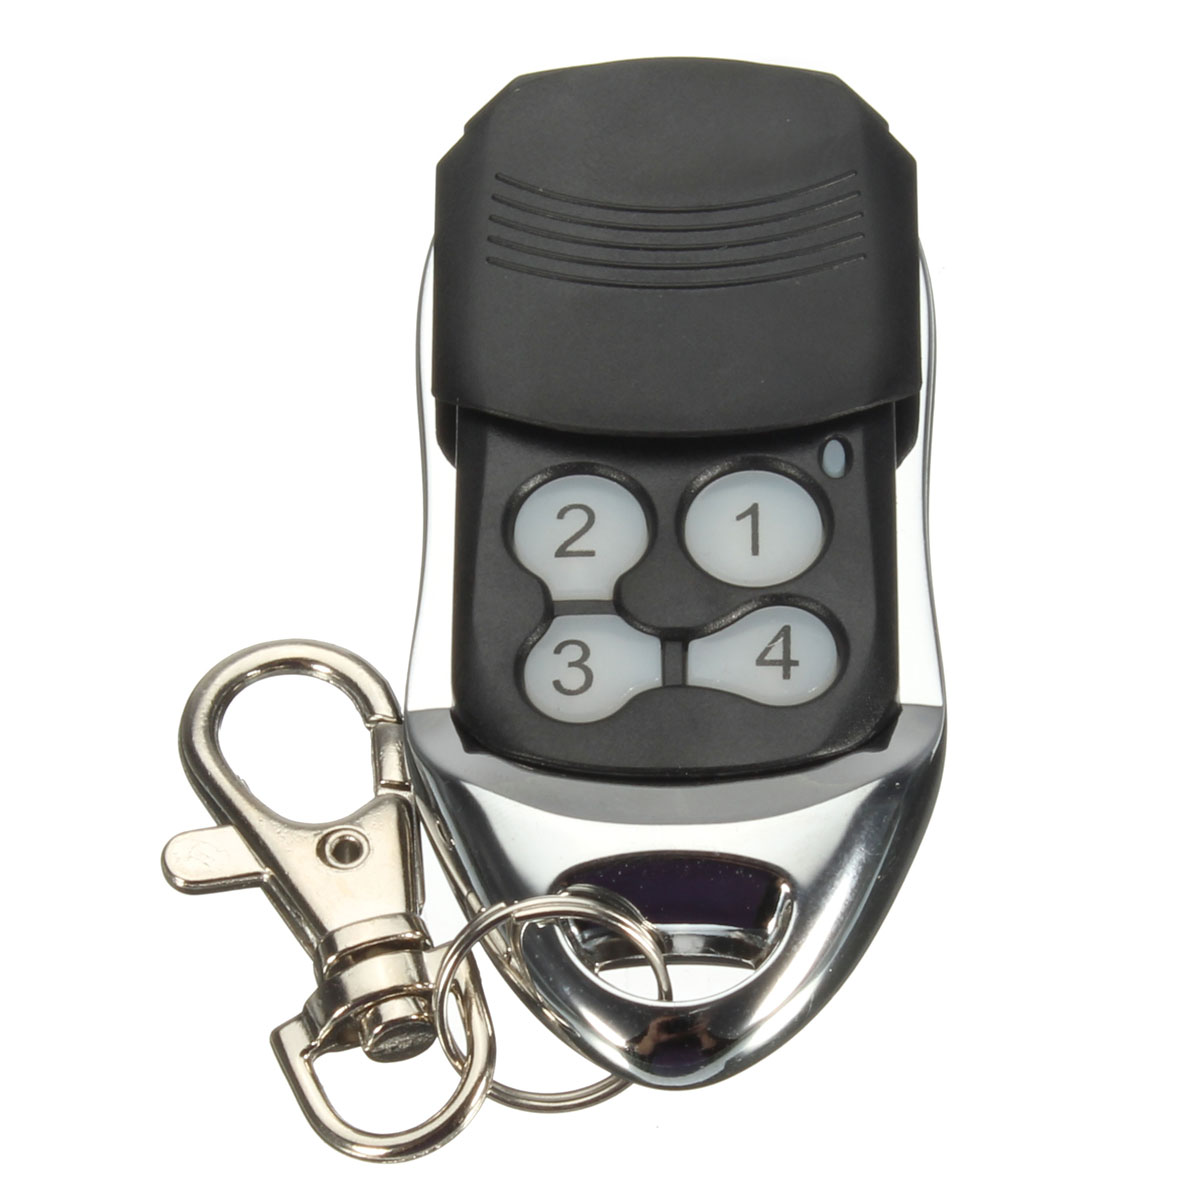 4-Button-433MHz-Black-Garage-Gate-Key-Remote-Control-Replacement-For-RCG12C-1062211